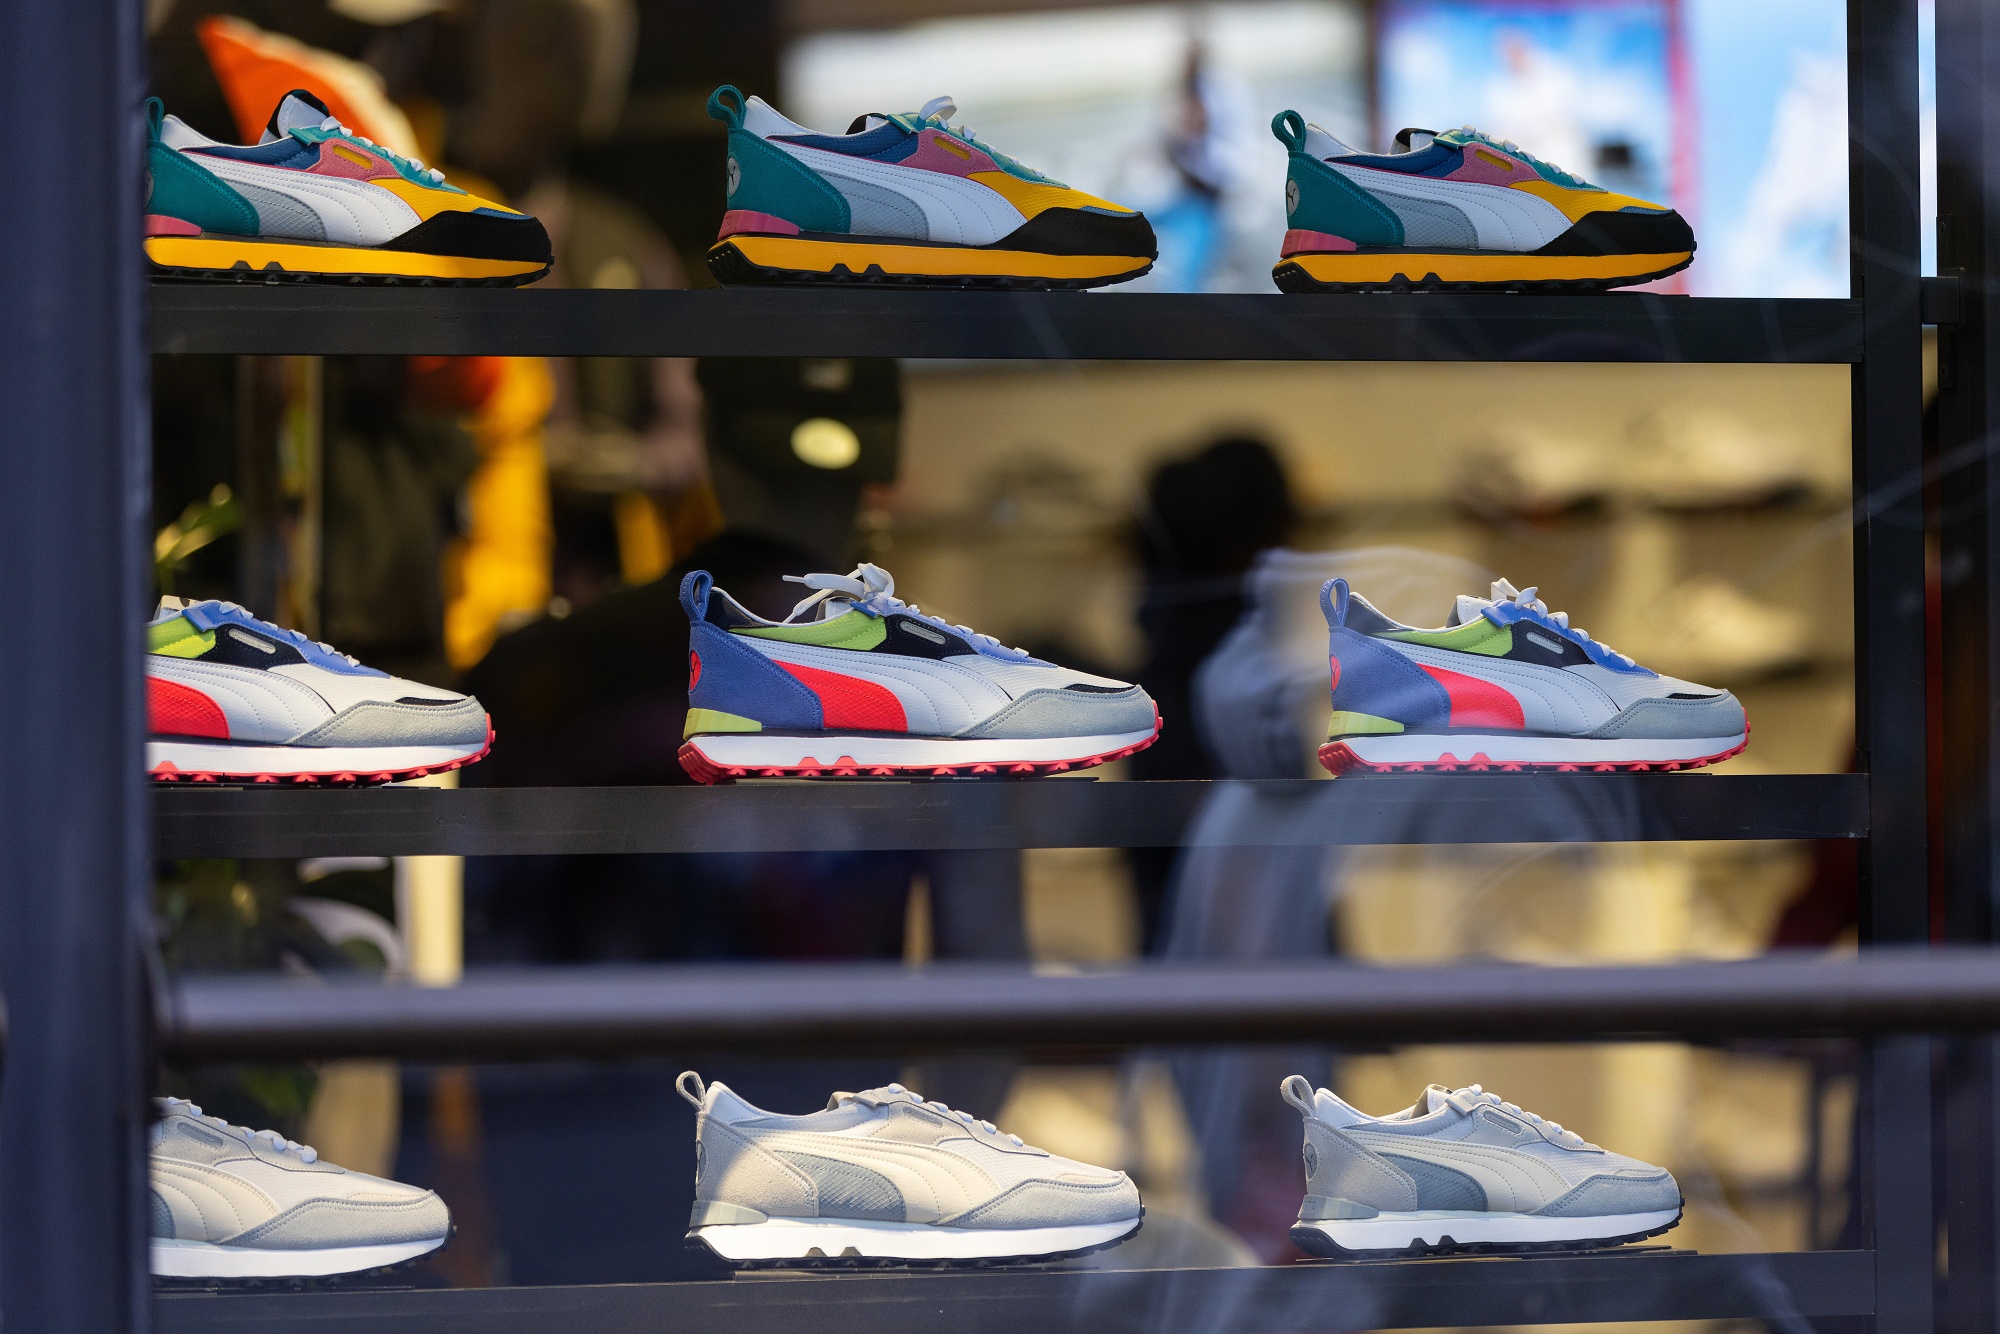 Puma Stock Falls Most in Three Years After Analyst Call - Bloomberg